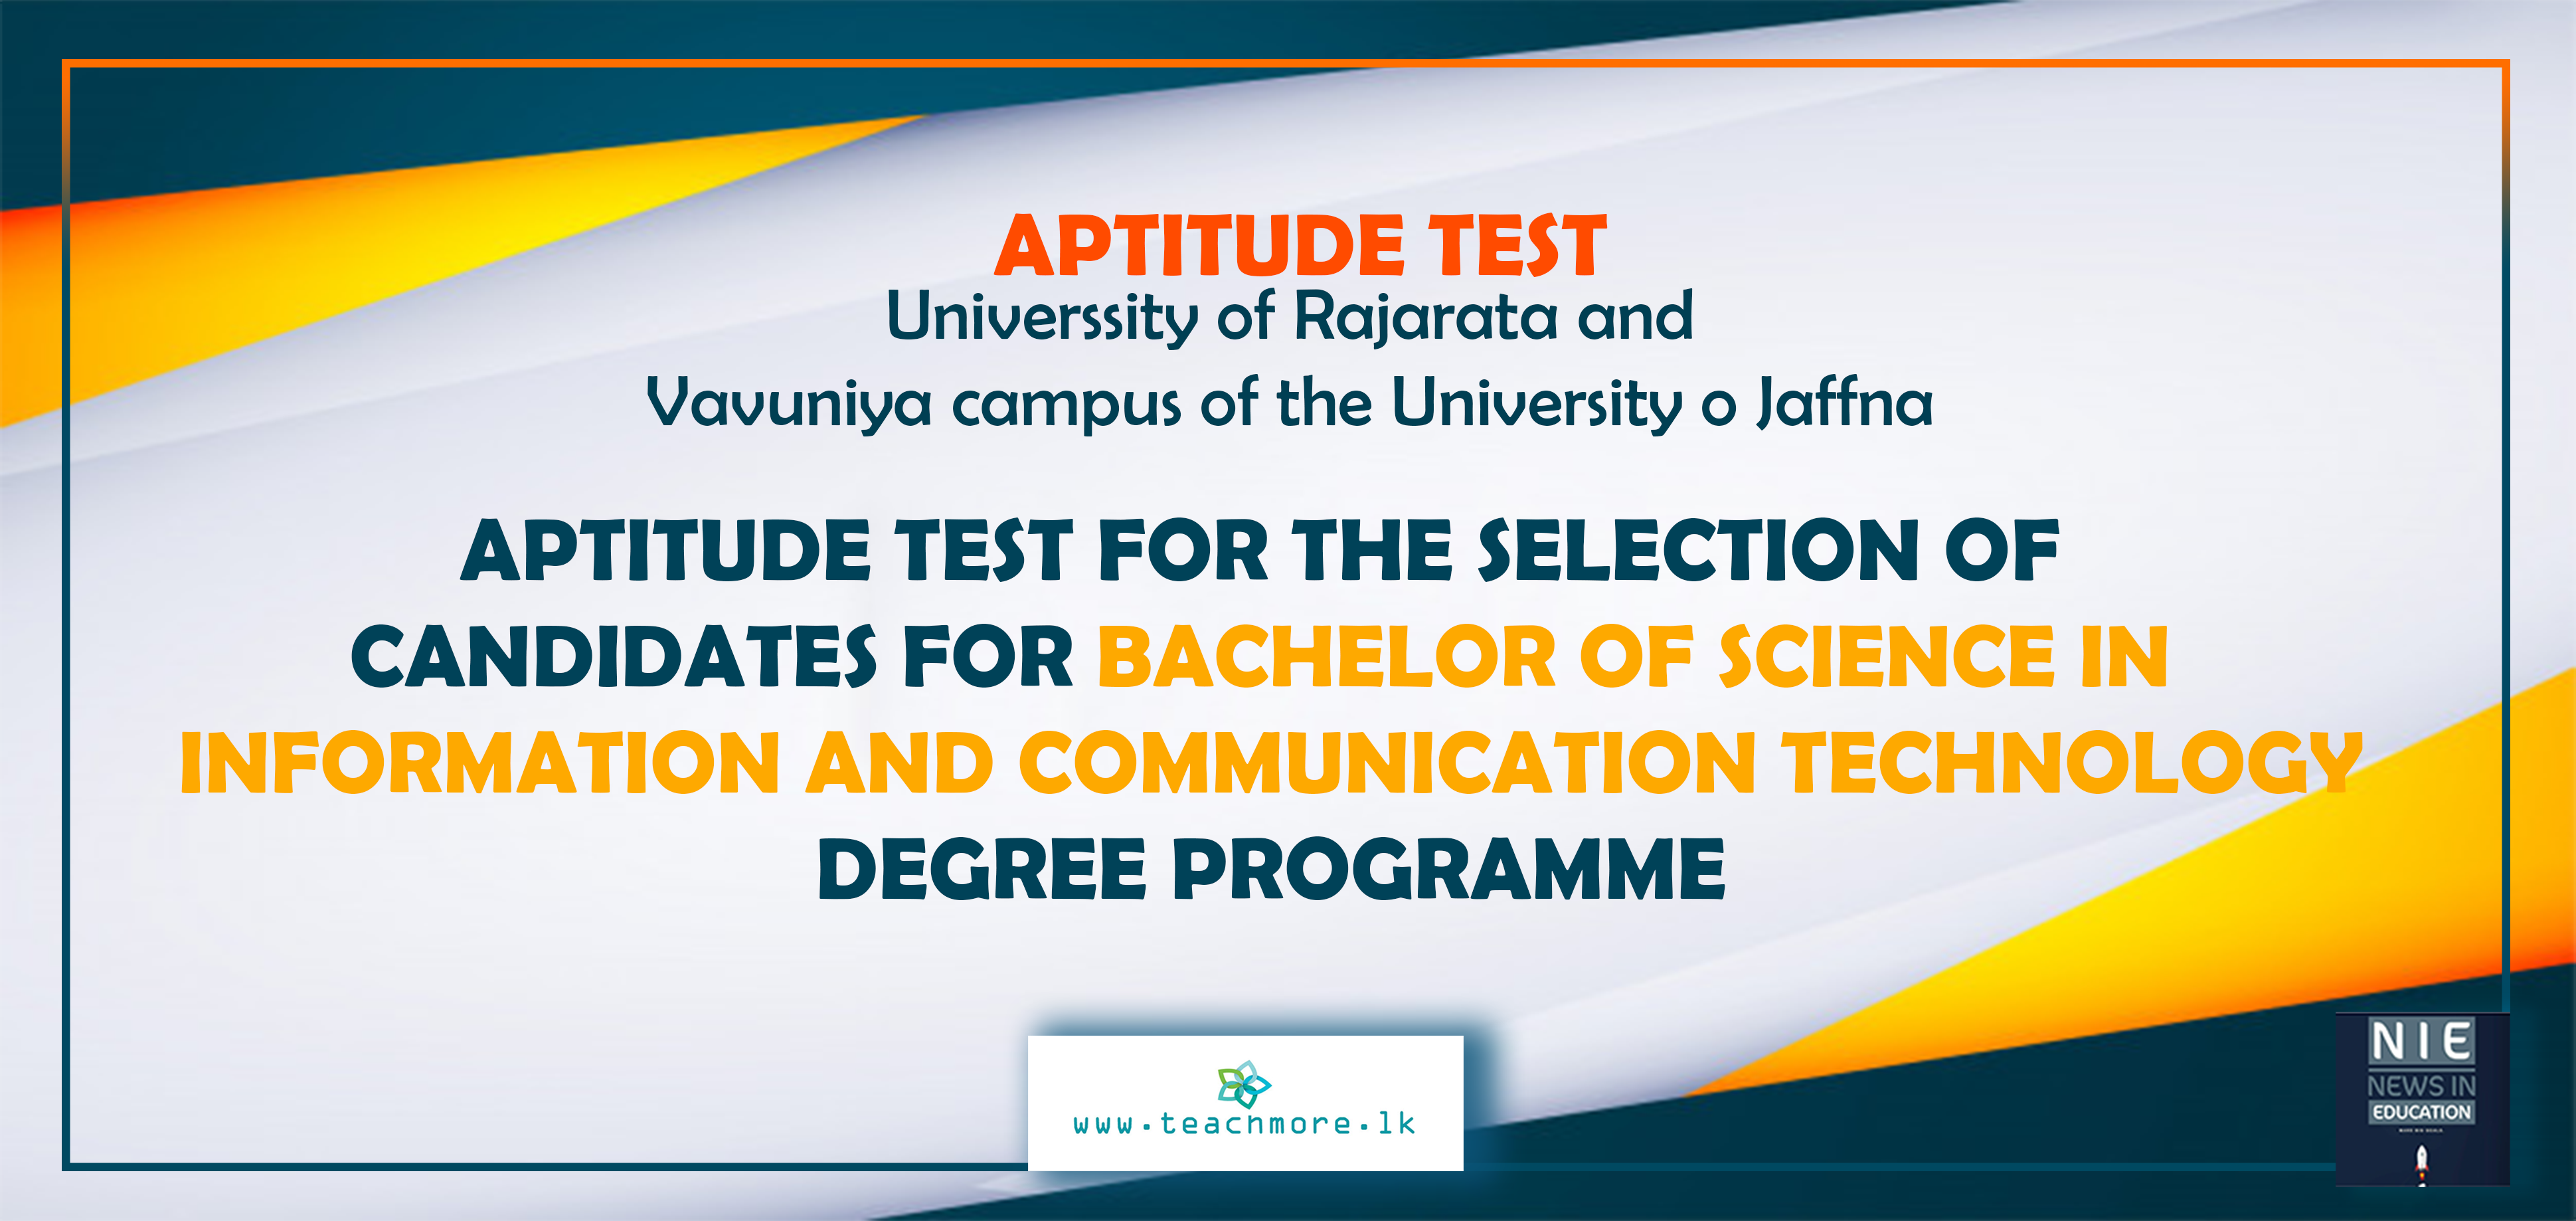 aptitude-test-bachelor-of-science-in-information-and-communication-technology-degree-programme